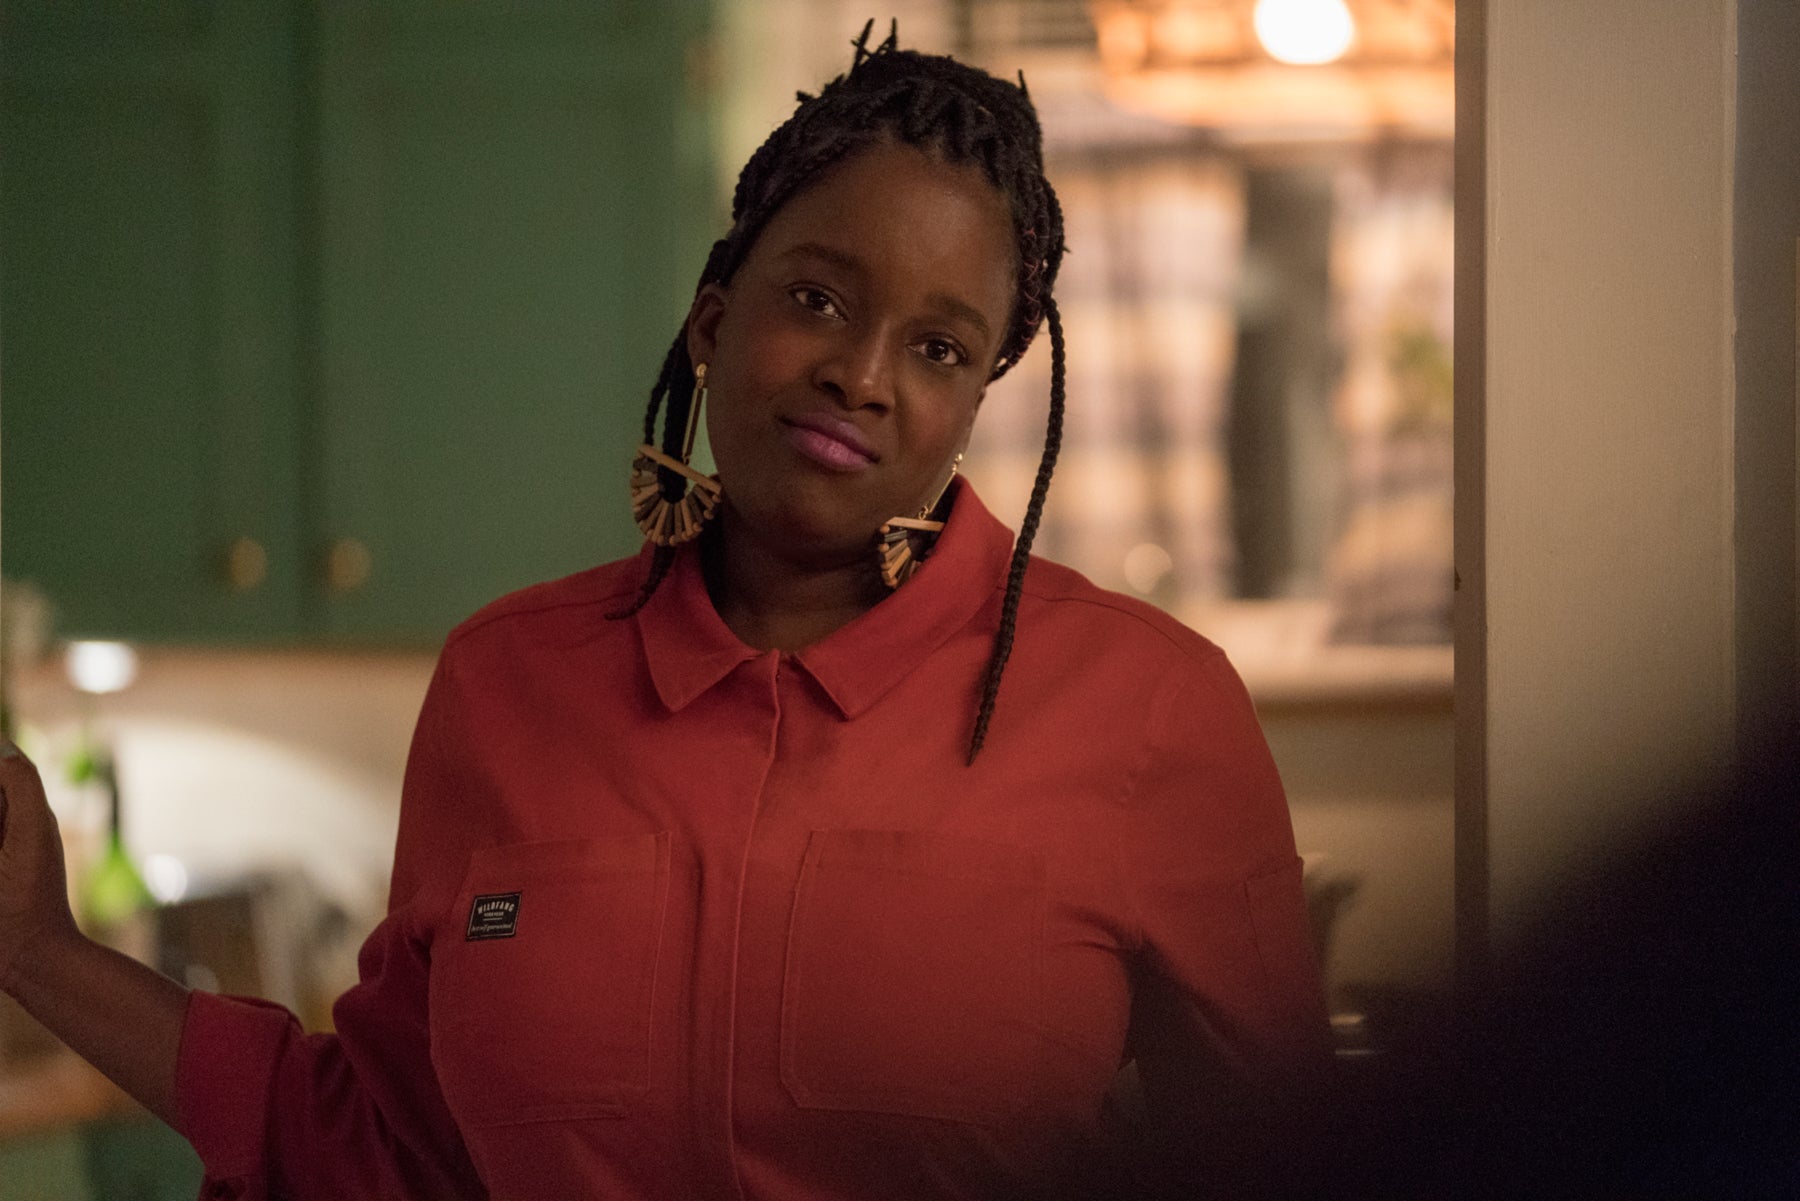 Annie’s roommate, Fran (Ololade “Lolly” Adefope), looks judgmental while standing in a doorway. In this scene from Shrill, she is listening to Annie talk about work.  